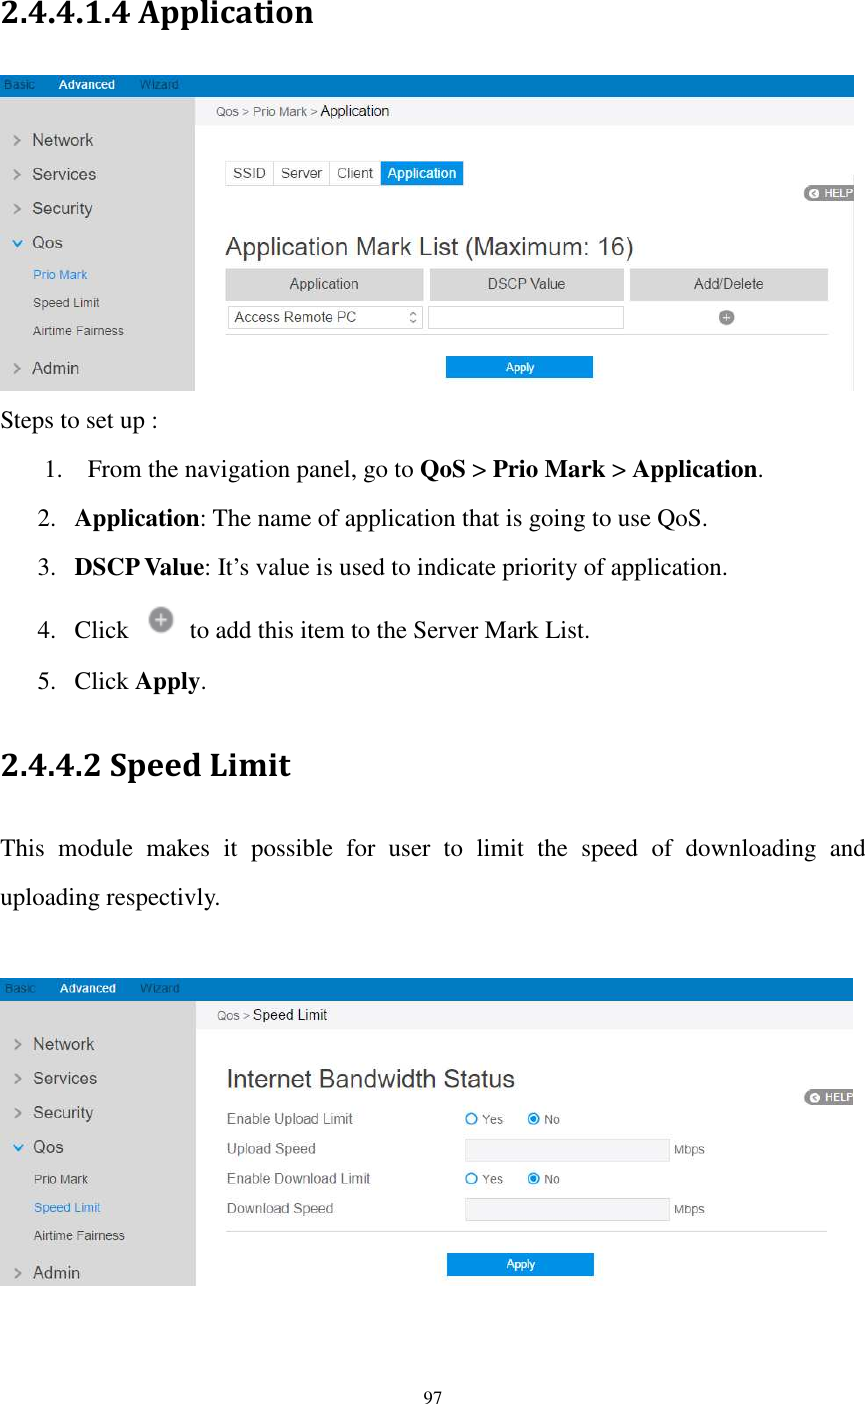  97  2.4.4.1.4 Application  Steps to set up : 1. From the navigation panel, go to QoS &gt; Prio Mark &gt; Application.   2. Application: The name of application that is going to use QoS.   3. DSCP Value: It’s value is used to indicate priority of application.   4. Click    to add this item to the Server Mark List. 5. Click Apply. 2.4.4.2 Speed Limit This  module  makes  it  possible  for  user  to  limit  the  speed  of  downloading  and uploading respectivly.      